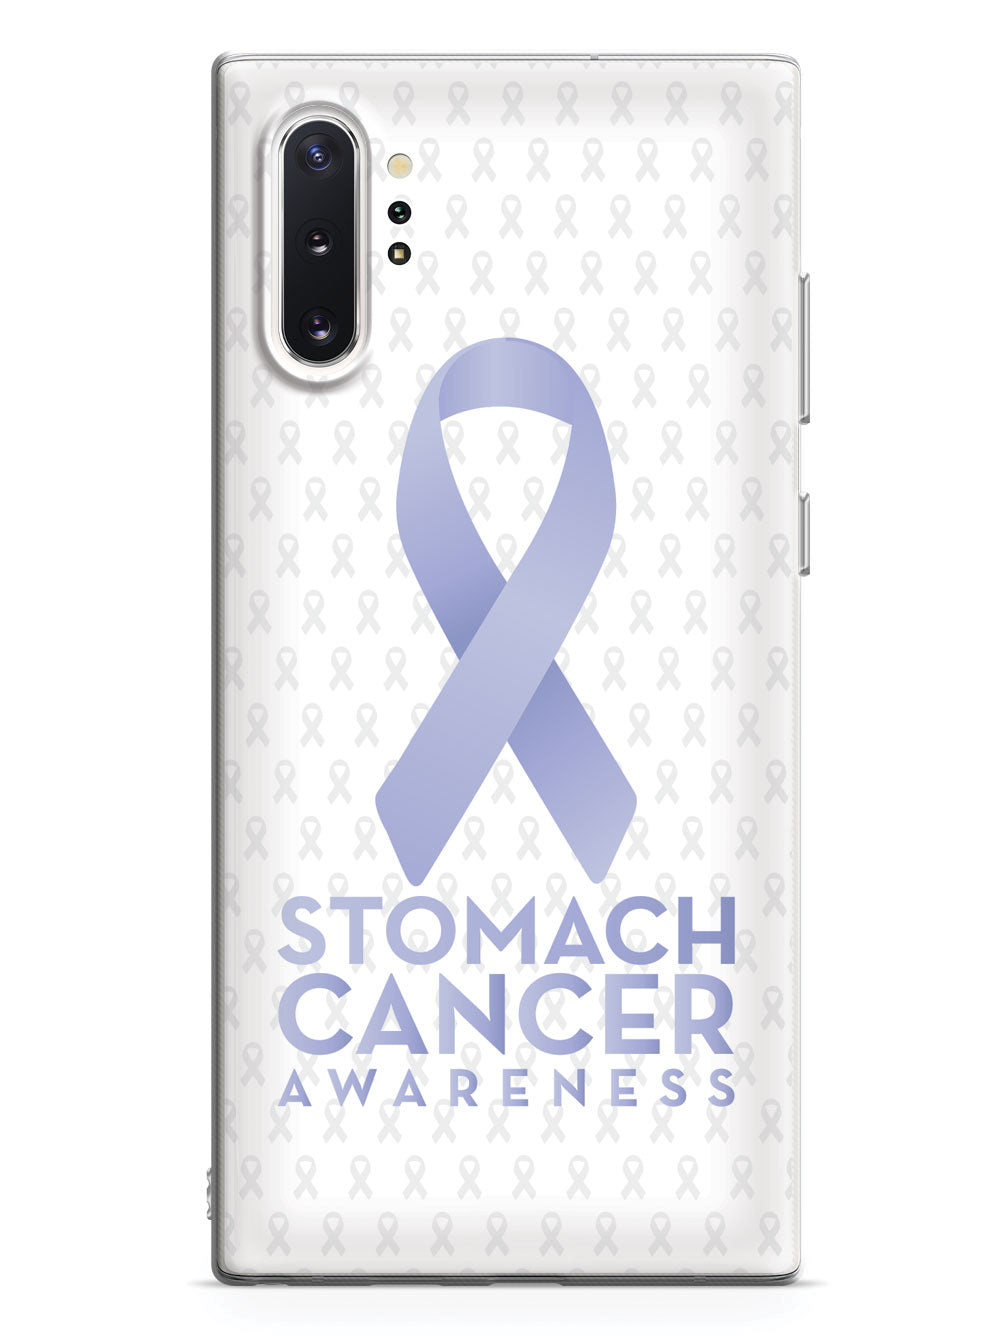 Stomach Cancer Awareness - White Case